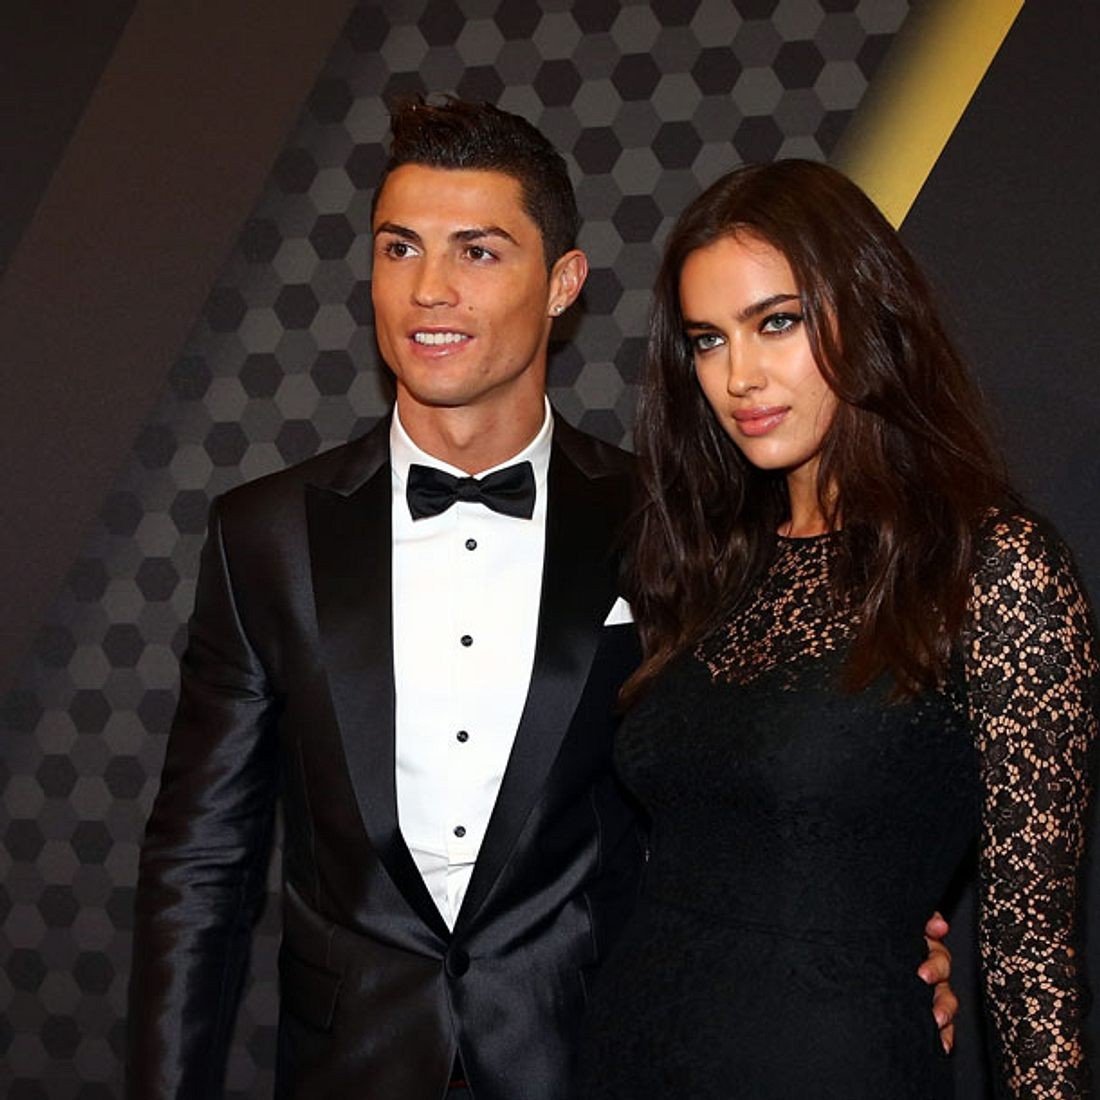 Did you know that Cristiano Ronaldo left Irina Shayk because of his mother: "I will never leave my mother for another woman"